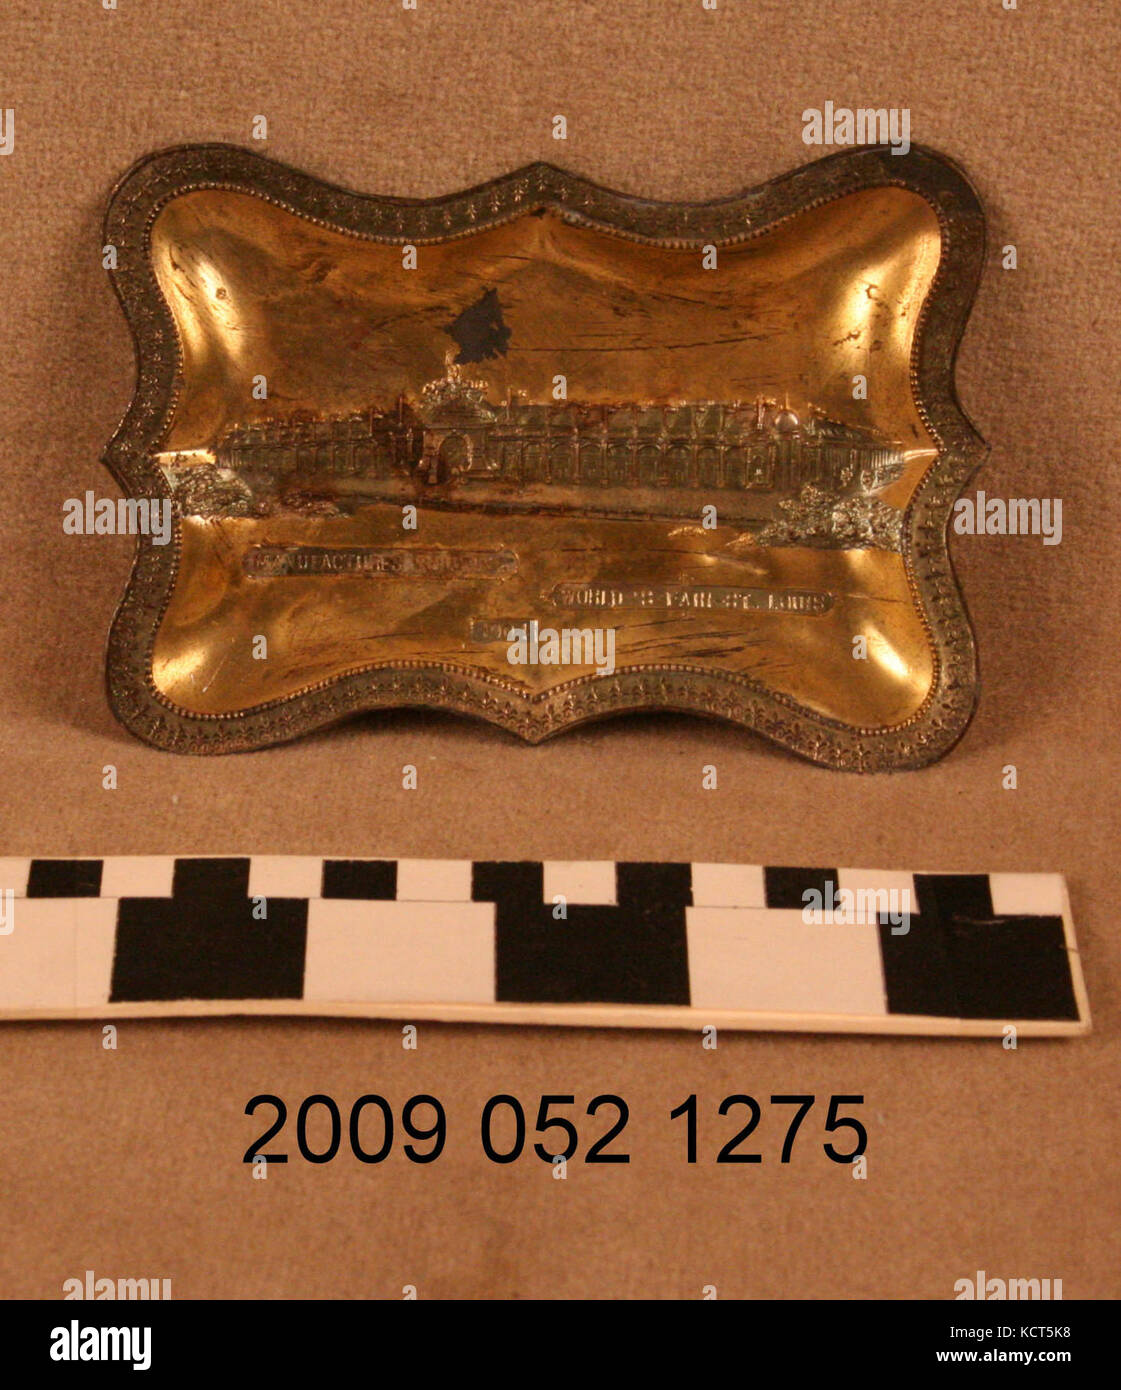 Gold Colored Pin Tray With Relief Image of the Palace of Manufactures Stock Photo